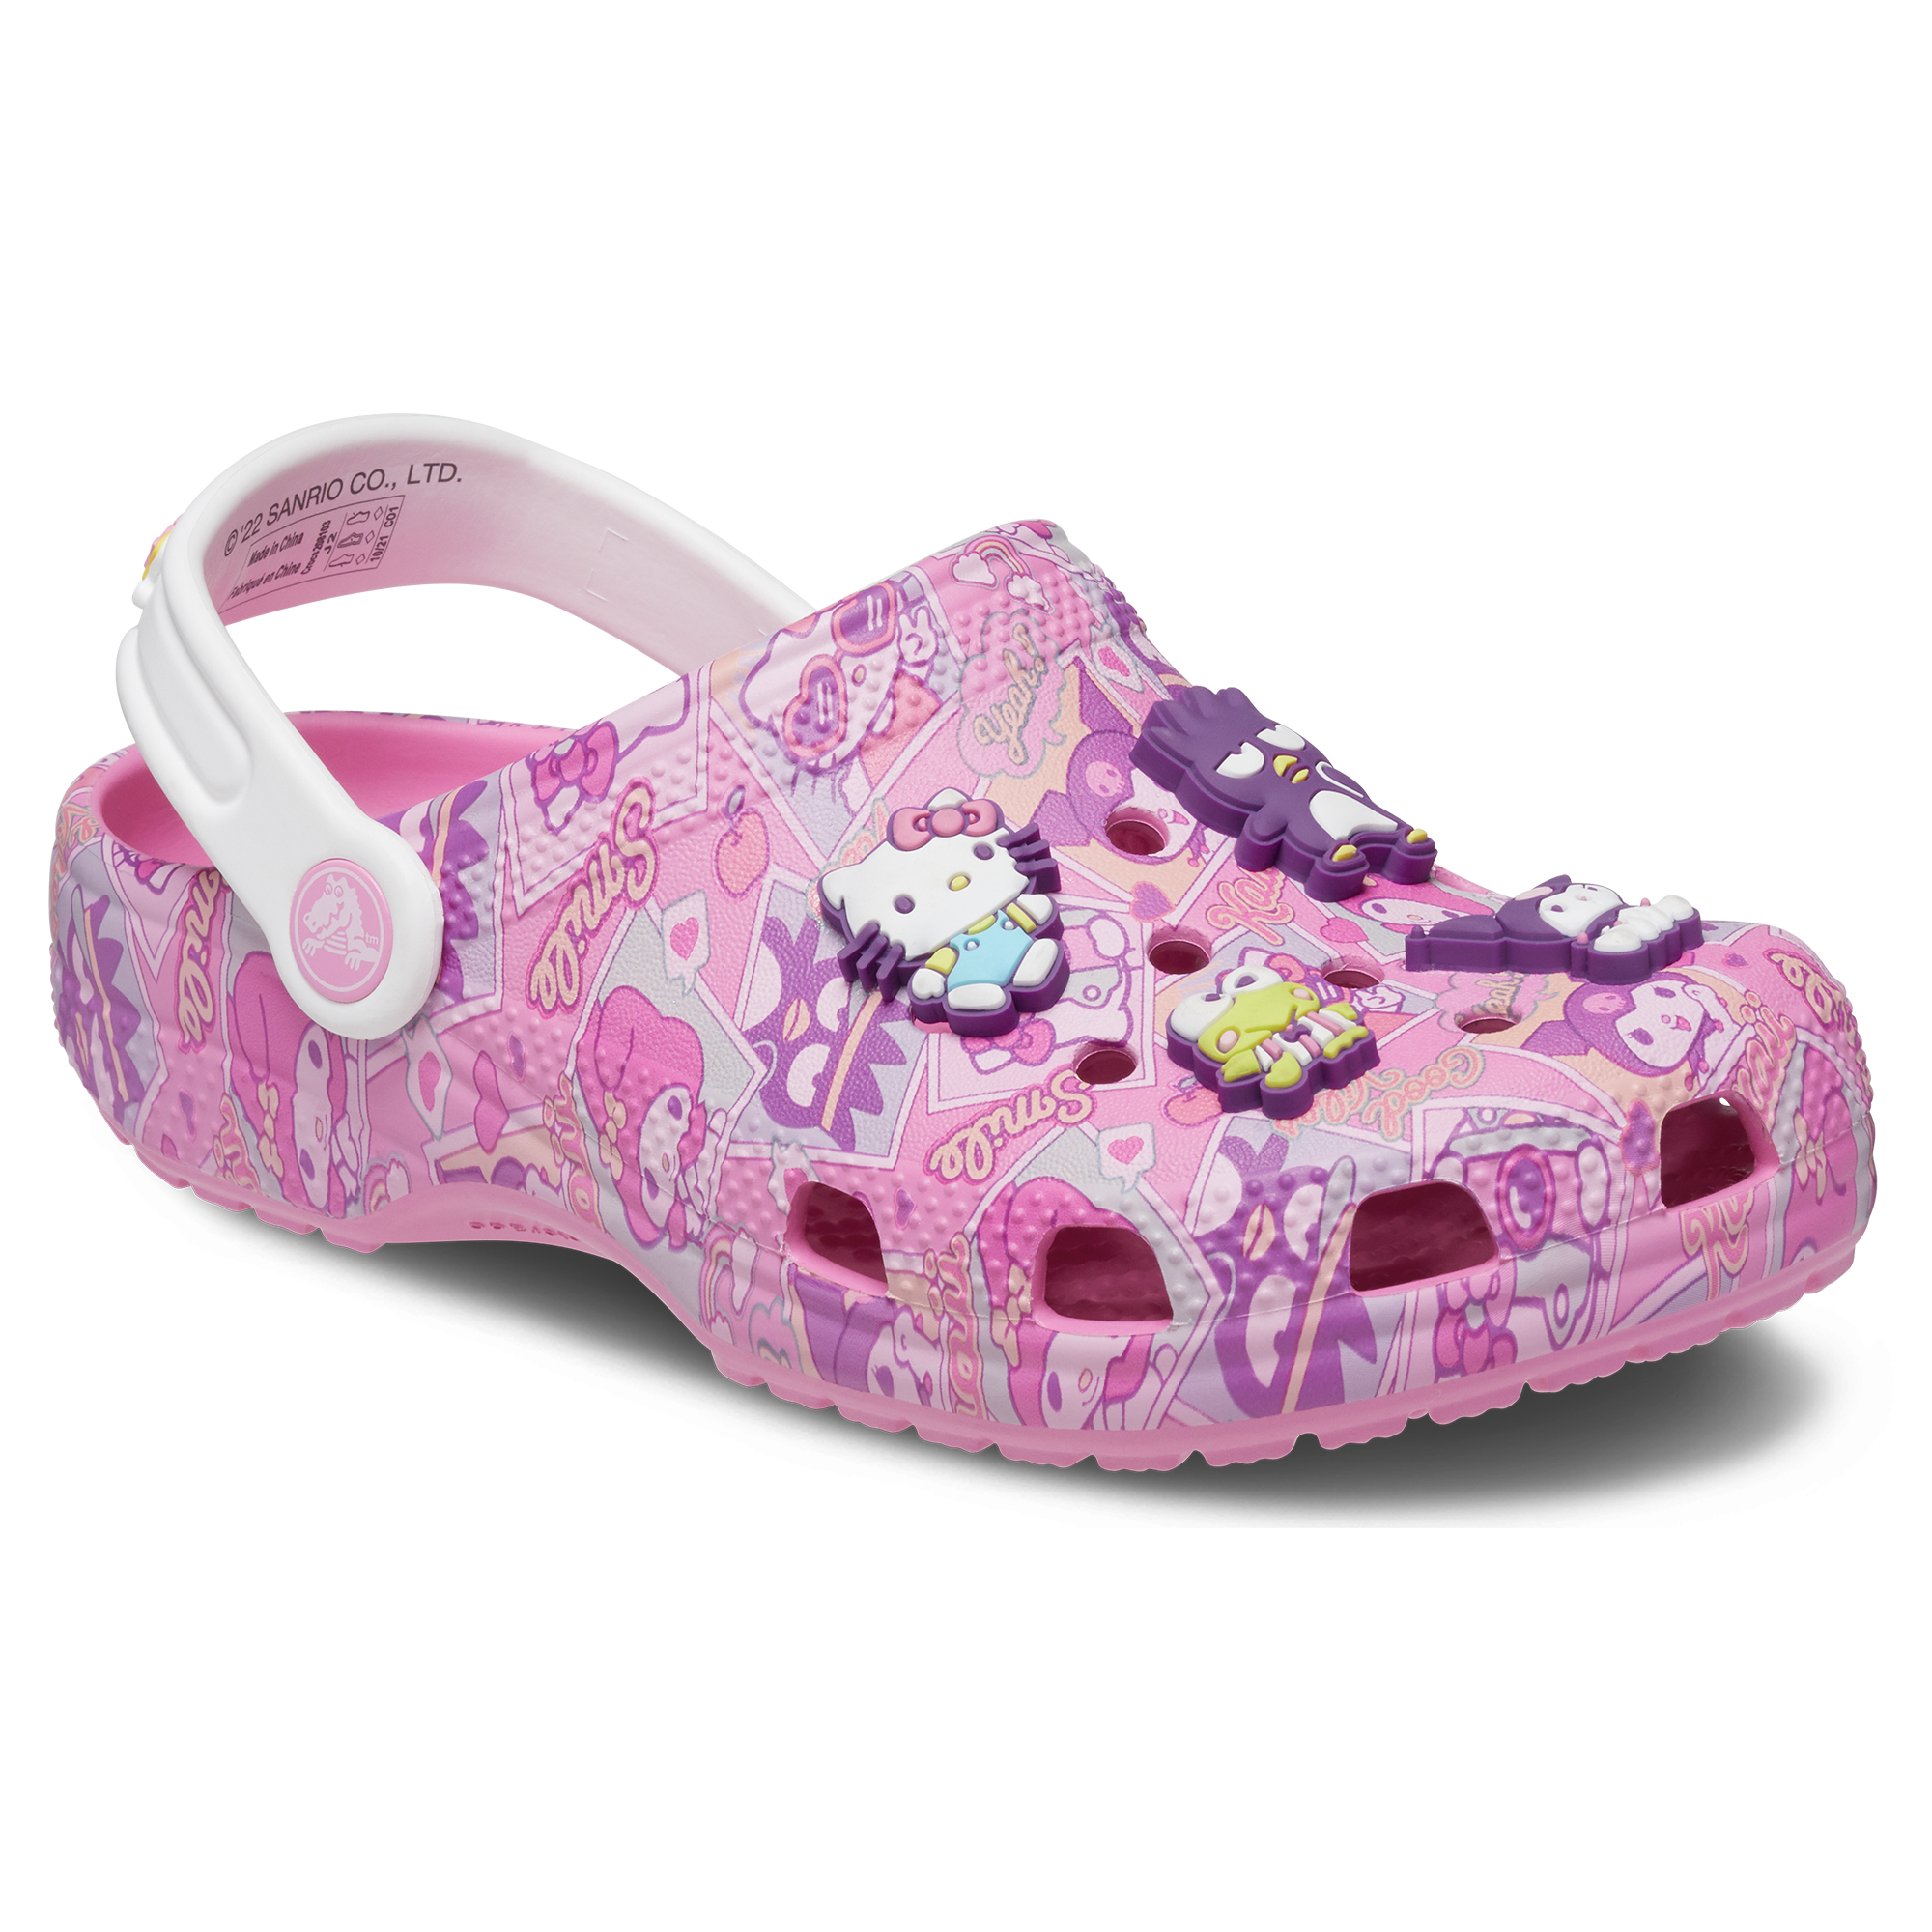 Hello Kitty and Friends x Crocs Adult Clog